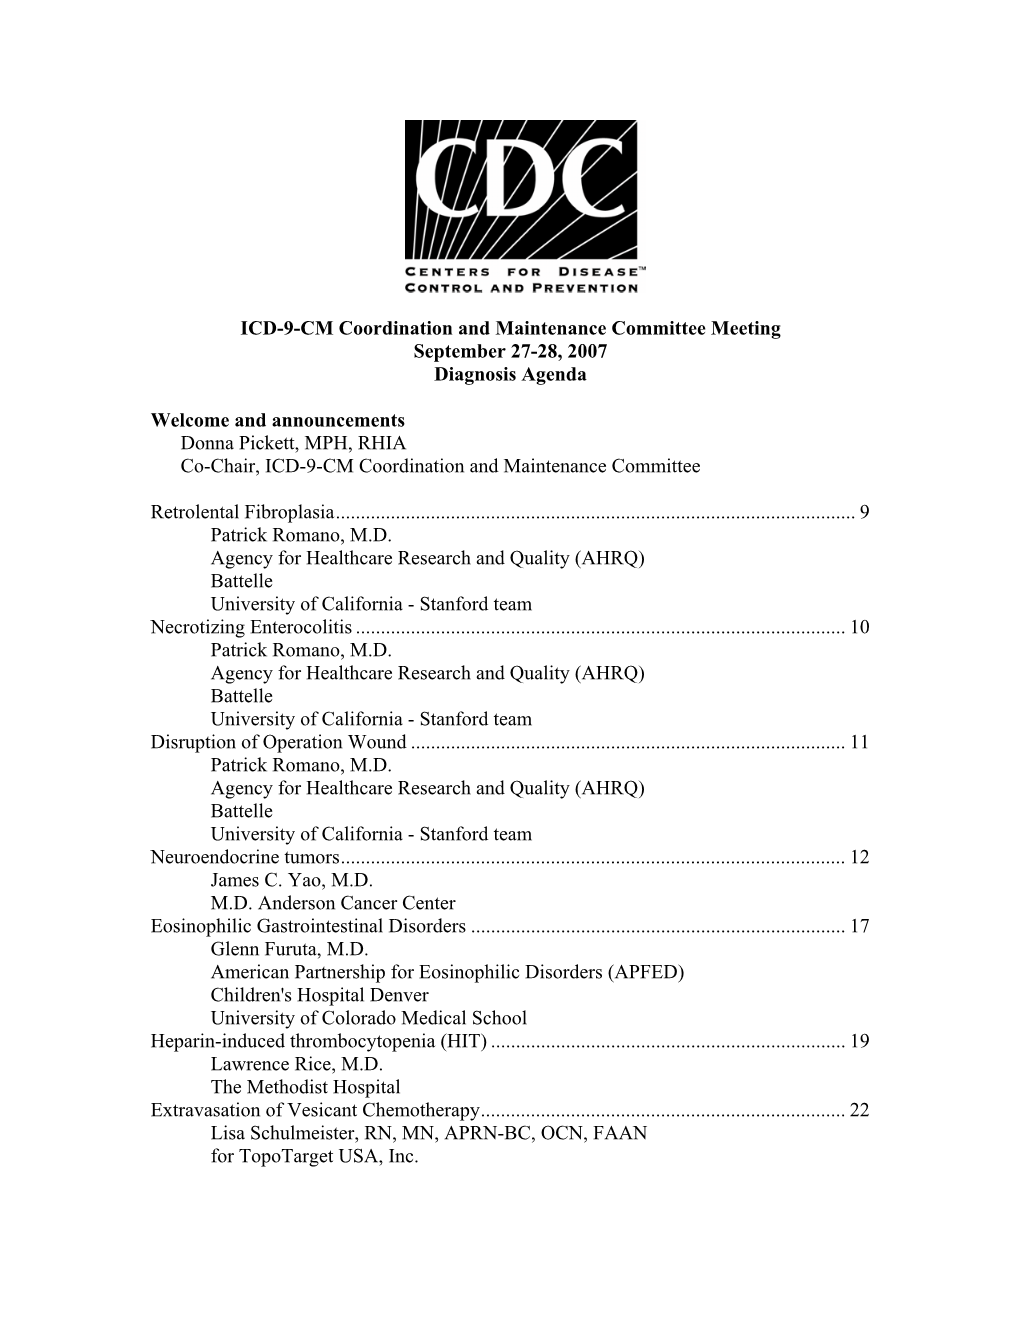 ICD-9-CM Coordination and Maintenance Committee Meeting September 27-28, 2007 Diagnosis Agenda Welcome and Announcements D